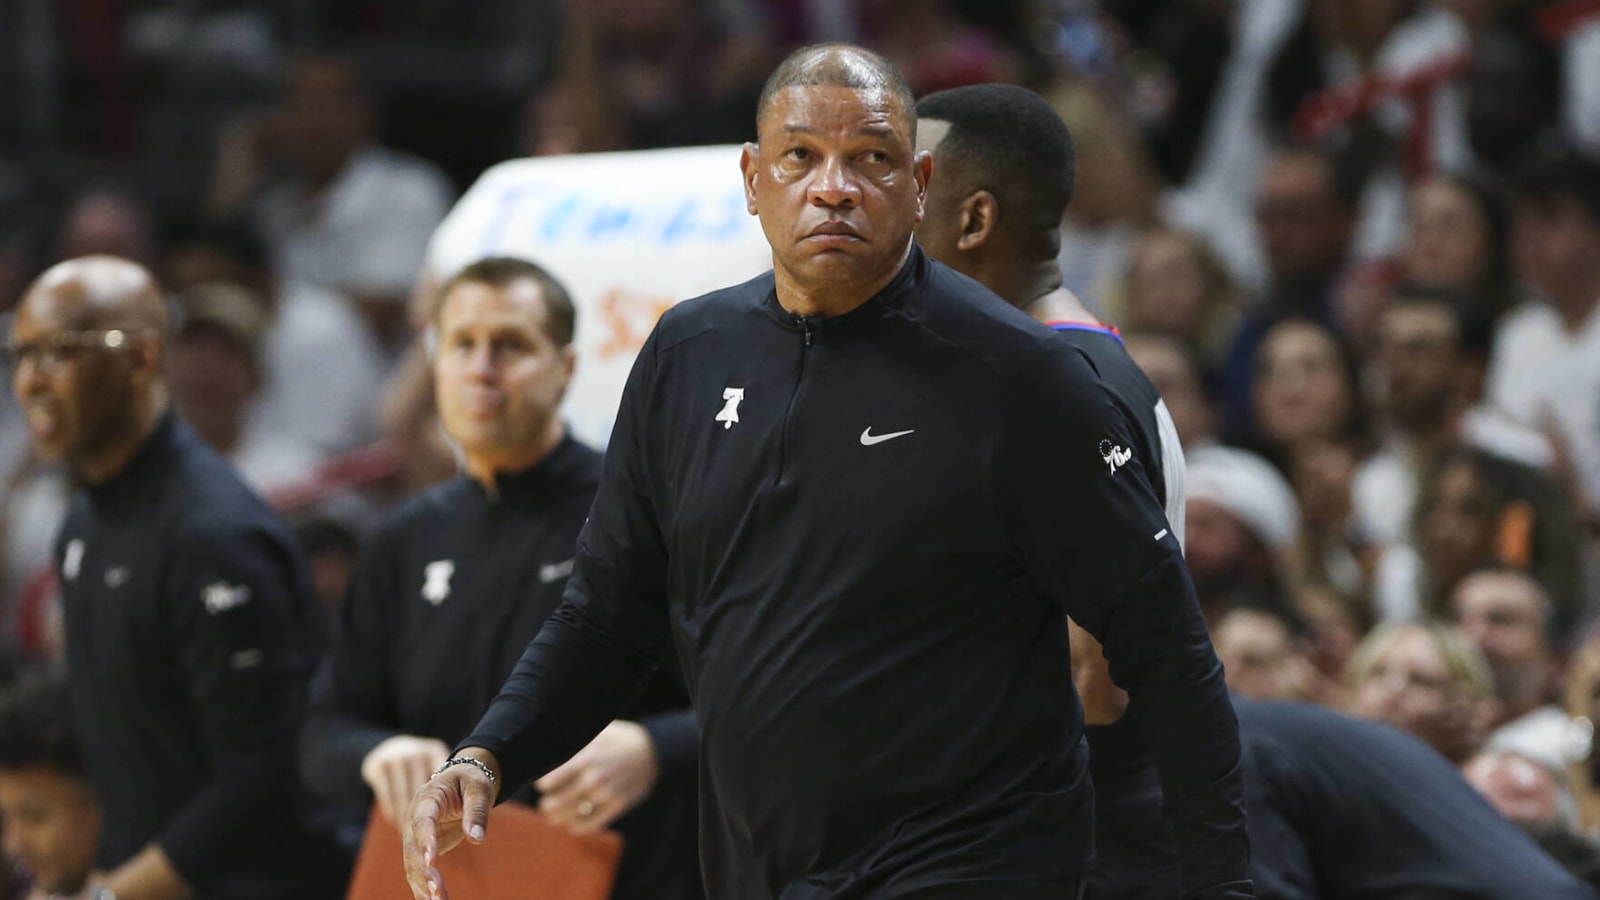 Doc Rivers has stubborn response after Game 1 loss